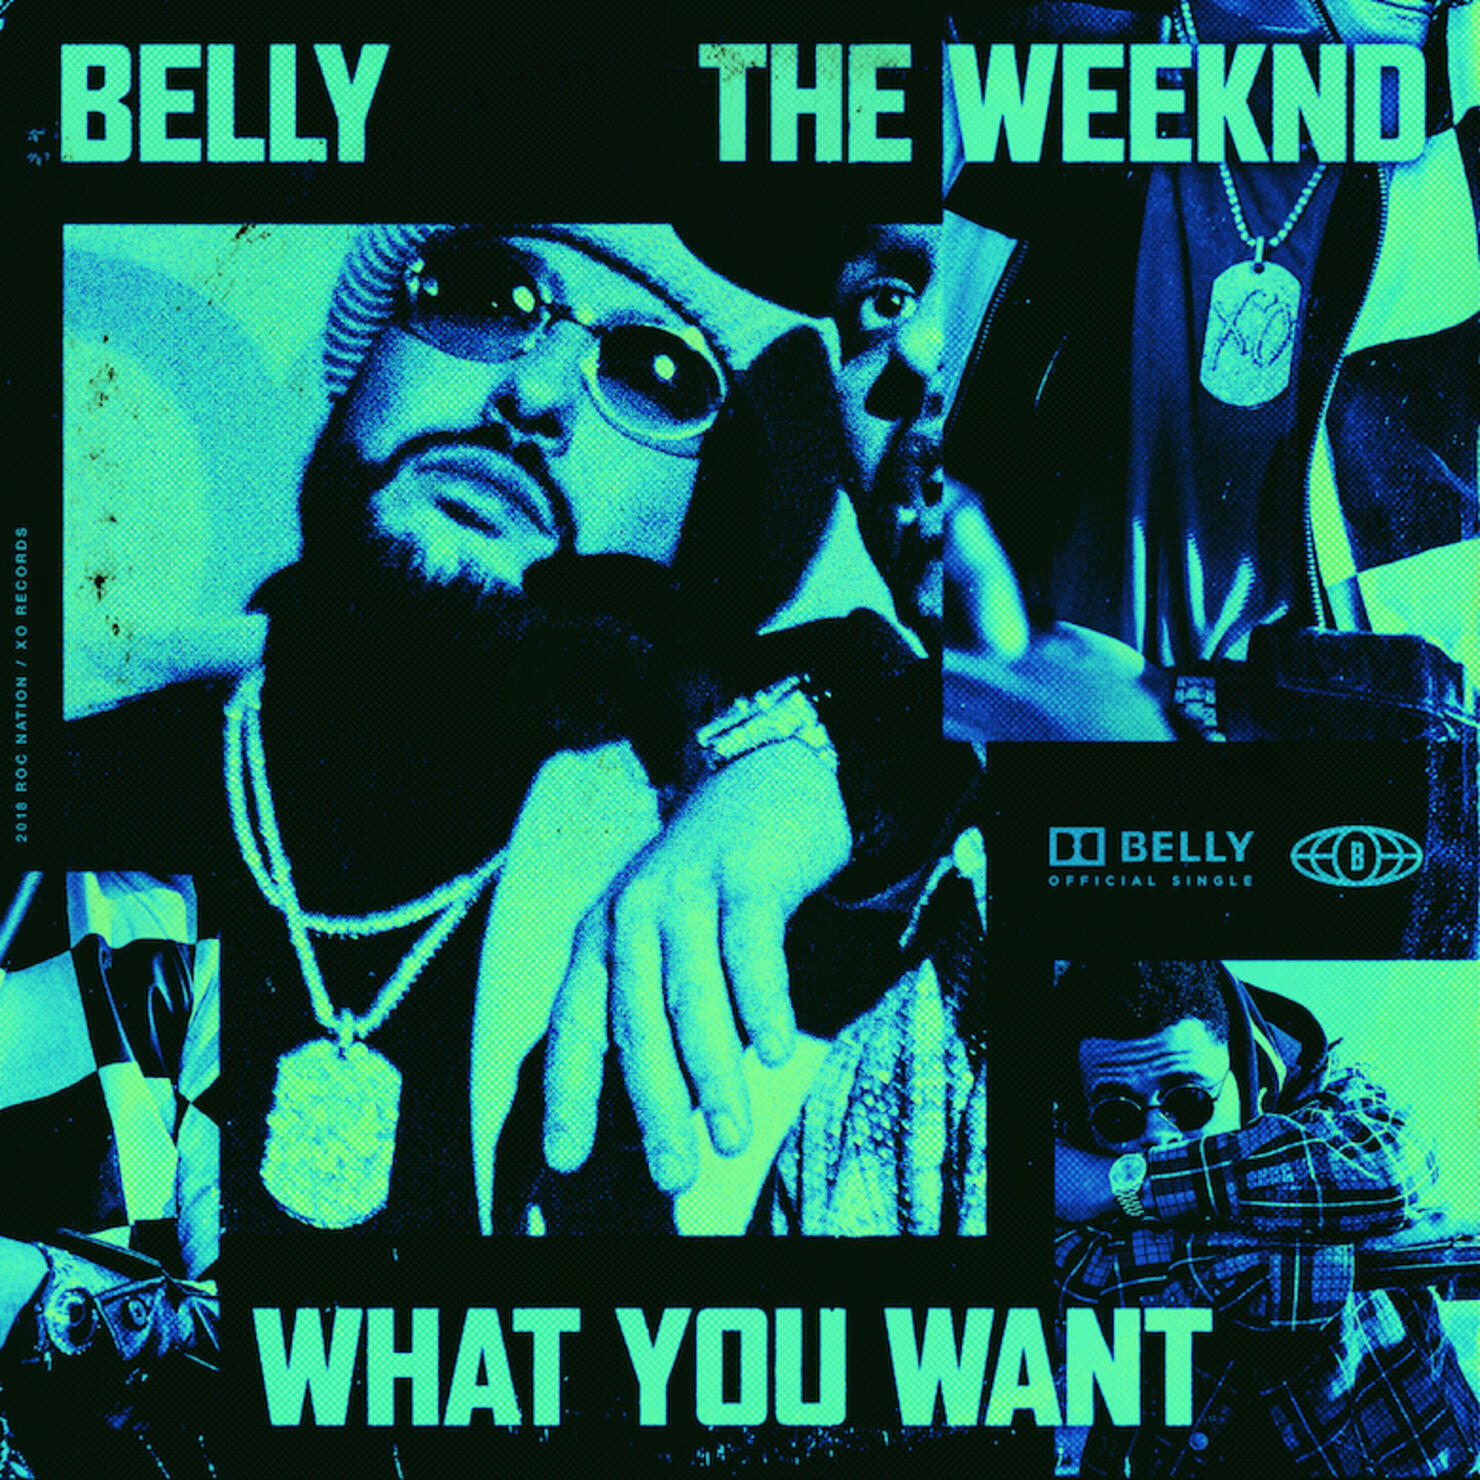 Belly & The Weeknd - "What You Want" Single Cover Art